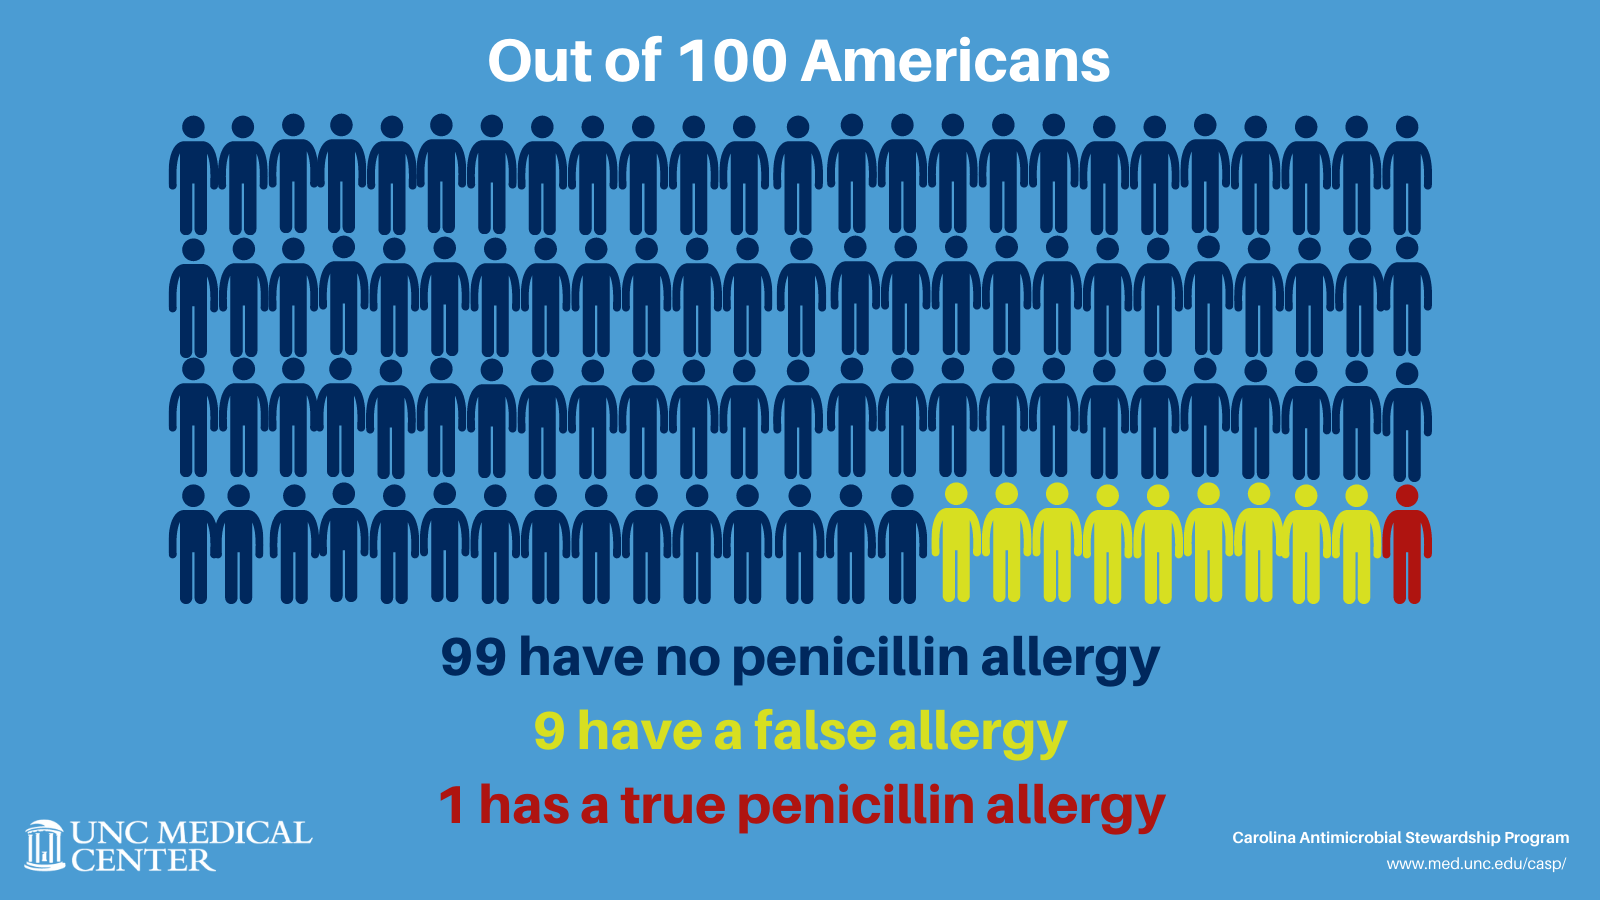 infographic showing that 1 in 100 people have a true penicillin to allergy